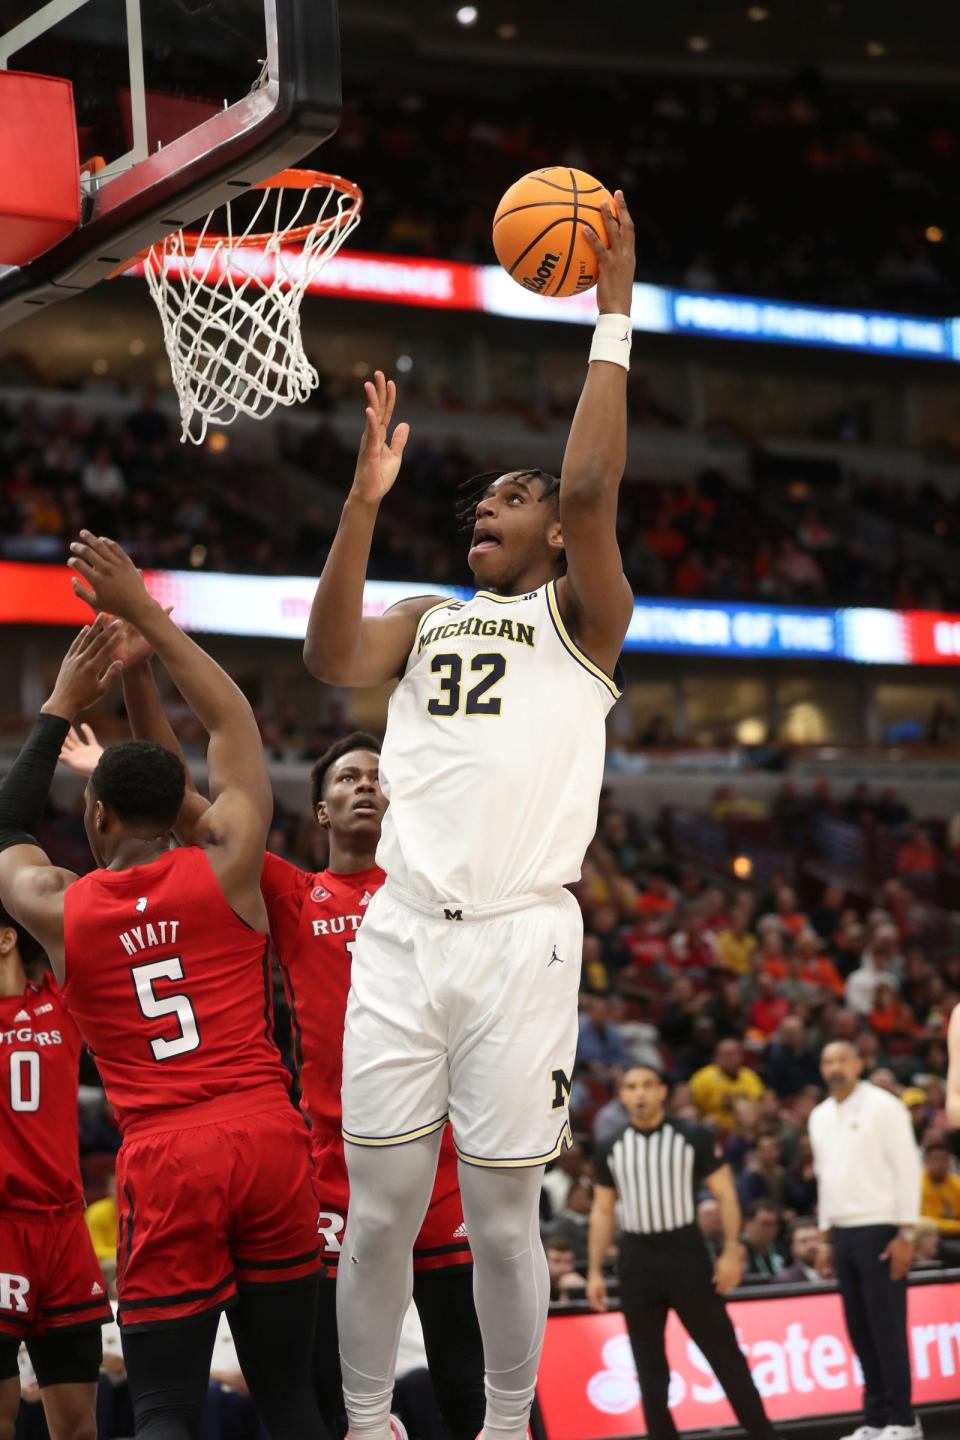 Michigan Wolverines forward Tarris Reed Jr. (32) shoots against Rutgers Scarlet Knights forward Aundre Hyatt (5) during second-half action in the Big Ten tournament at United Center in Chicago on Thursday, March 9, 2023.